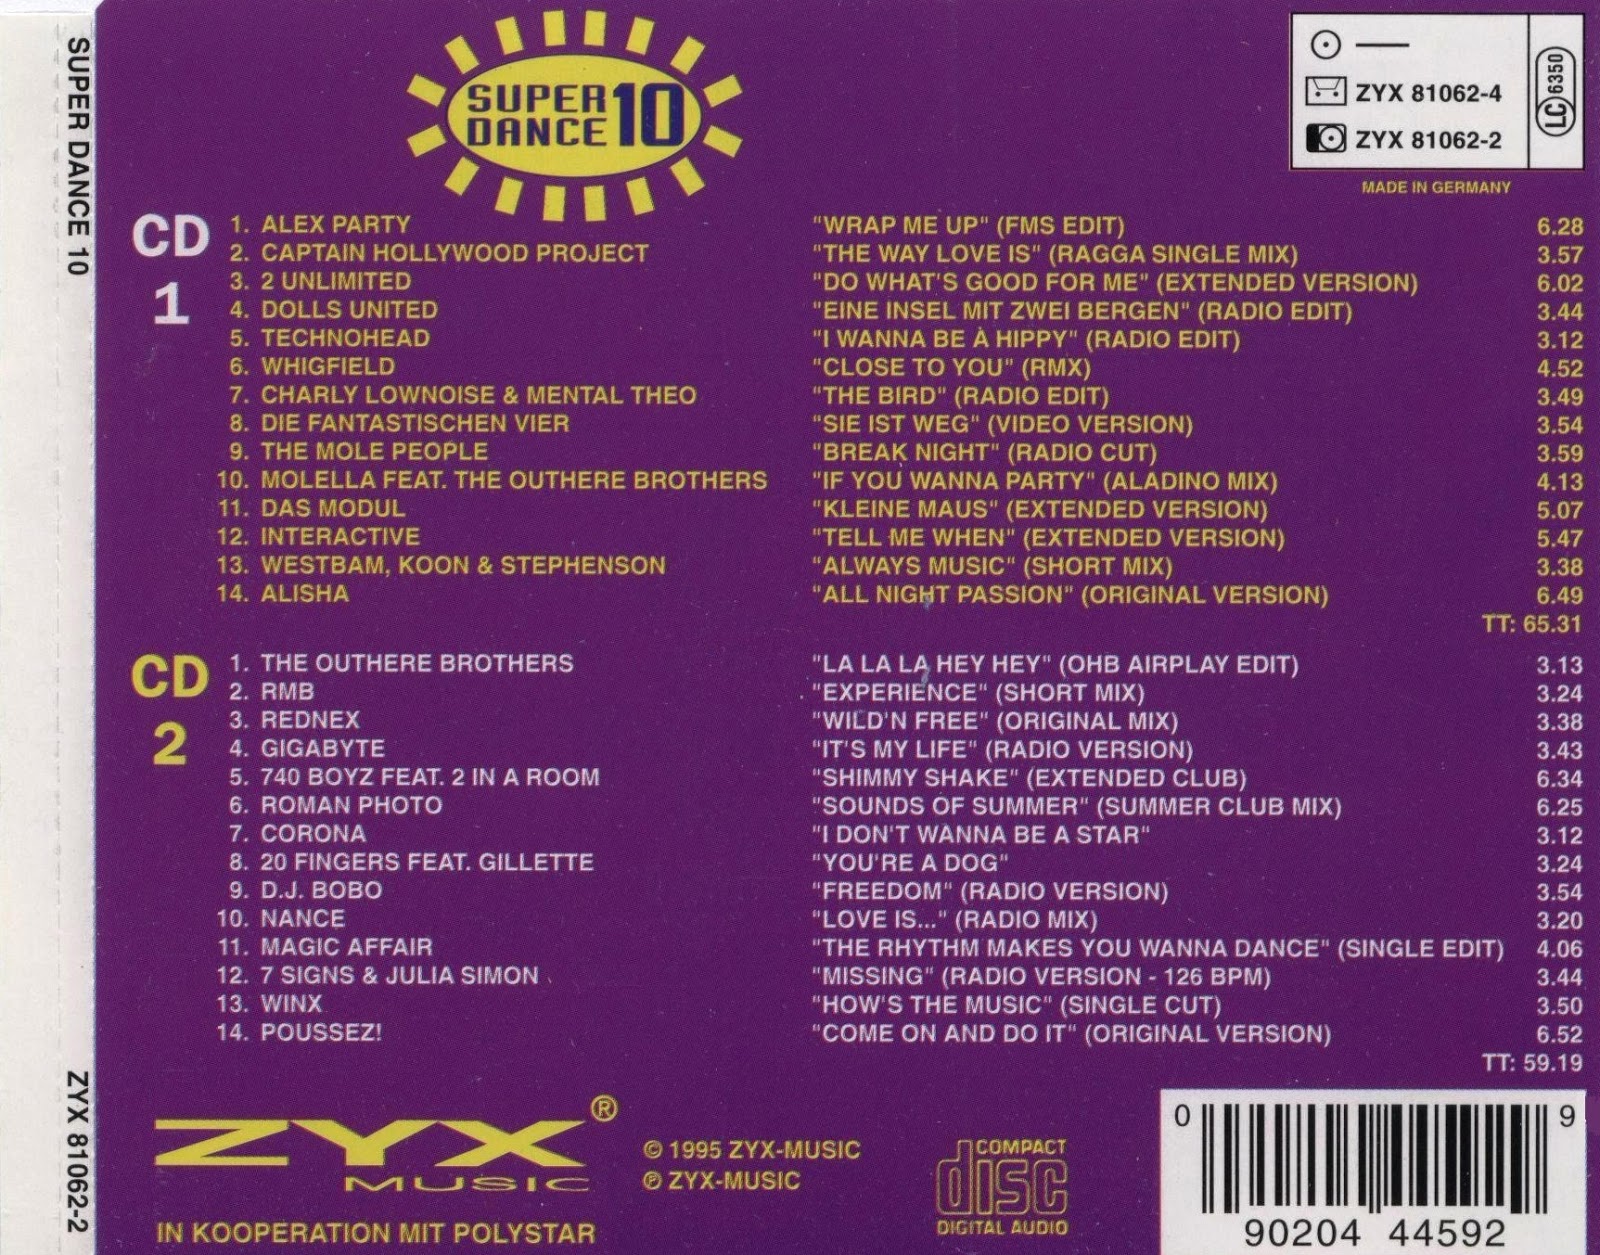 Extended songs. ZYX Music. Super Dance Music 1995. Captain Hollywood the way Love is. Супер дэнс Украина 2004 CD.